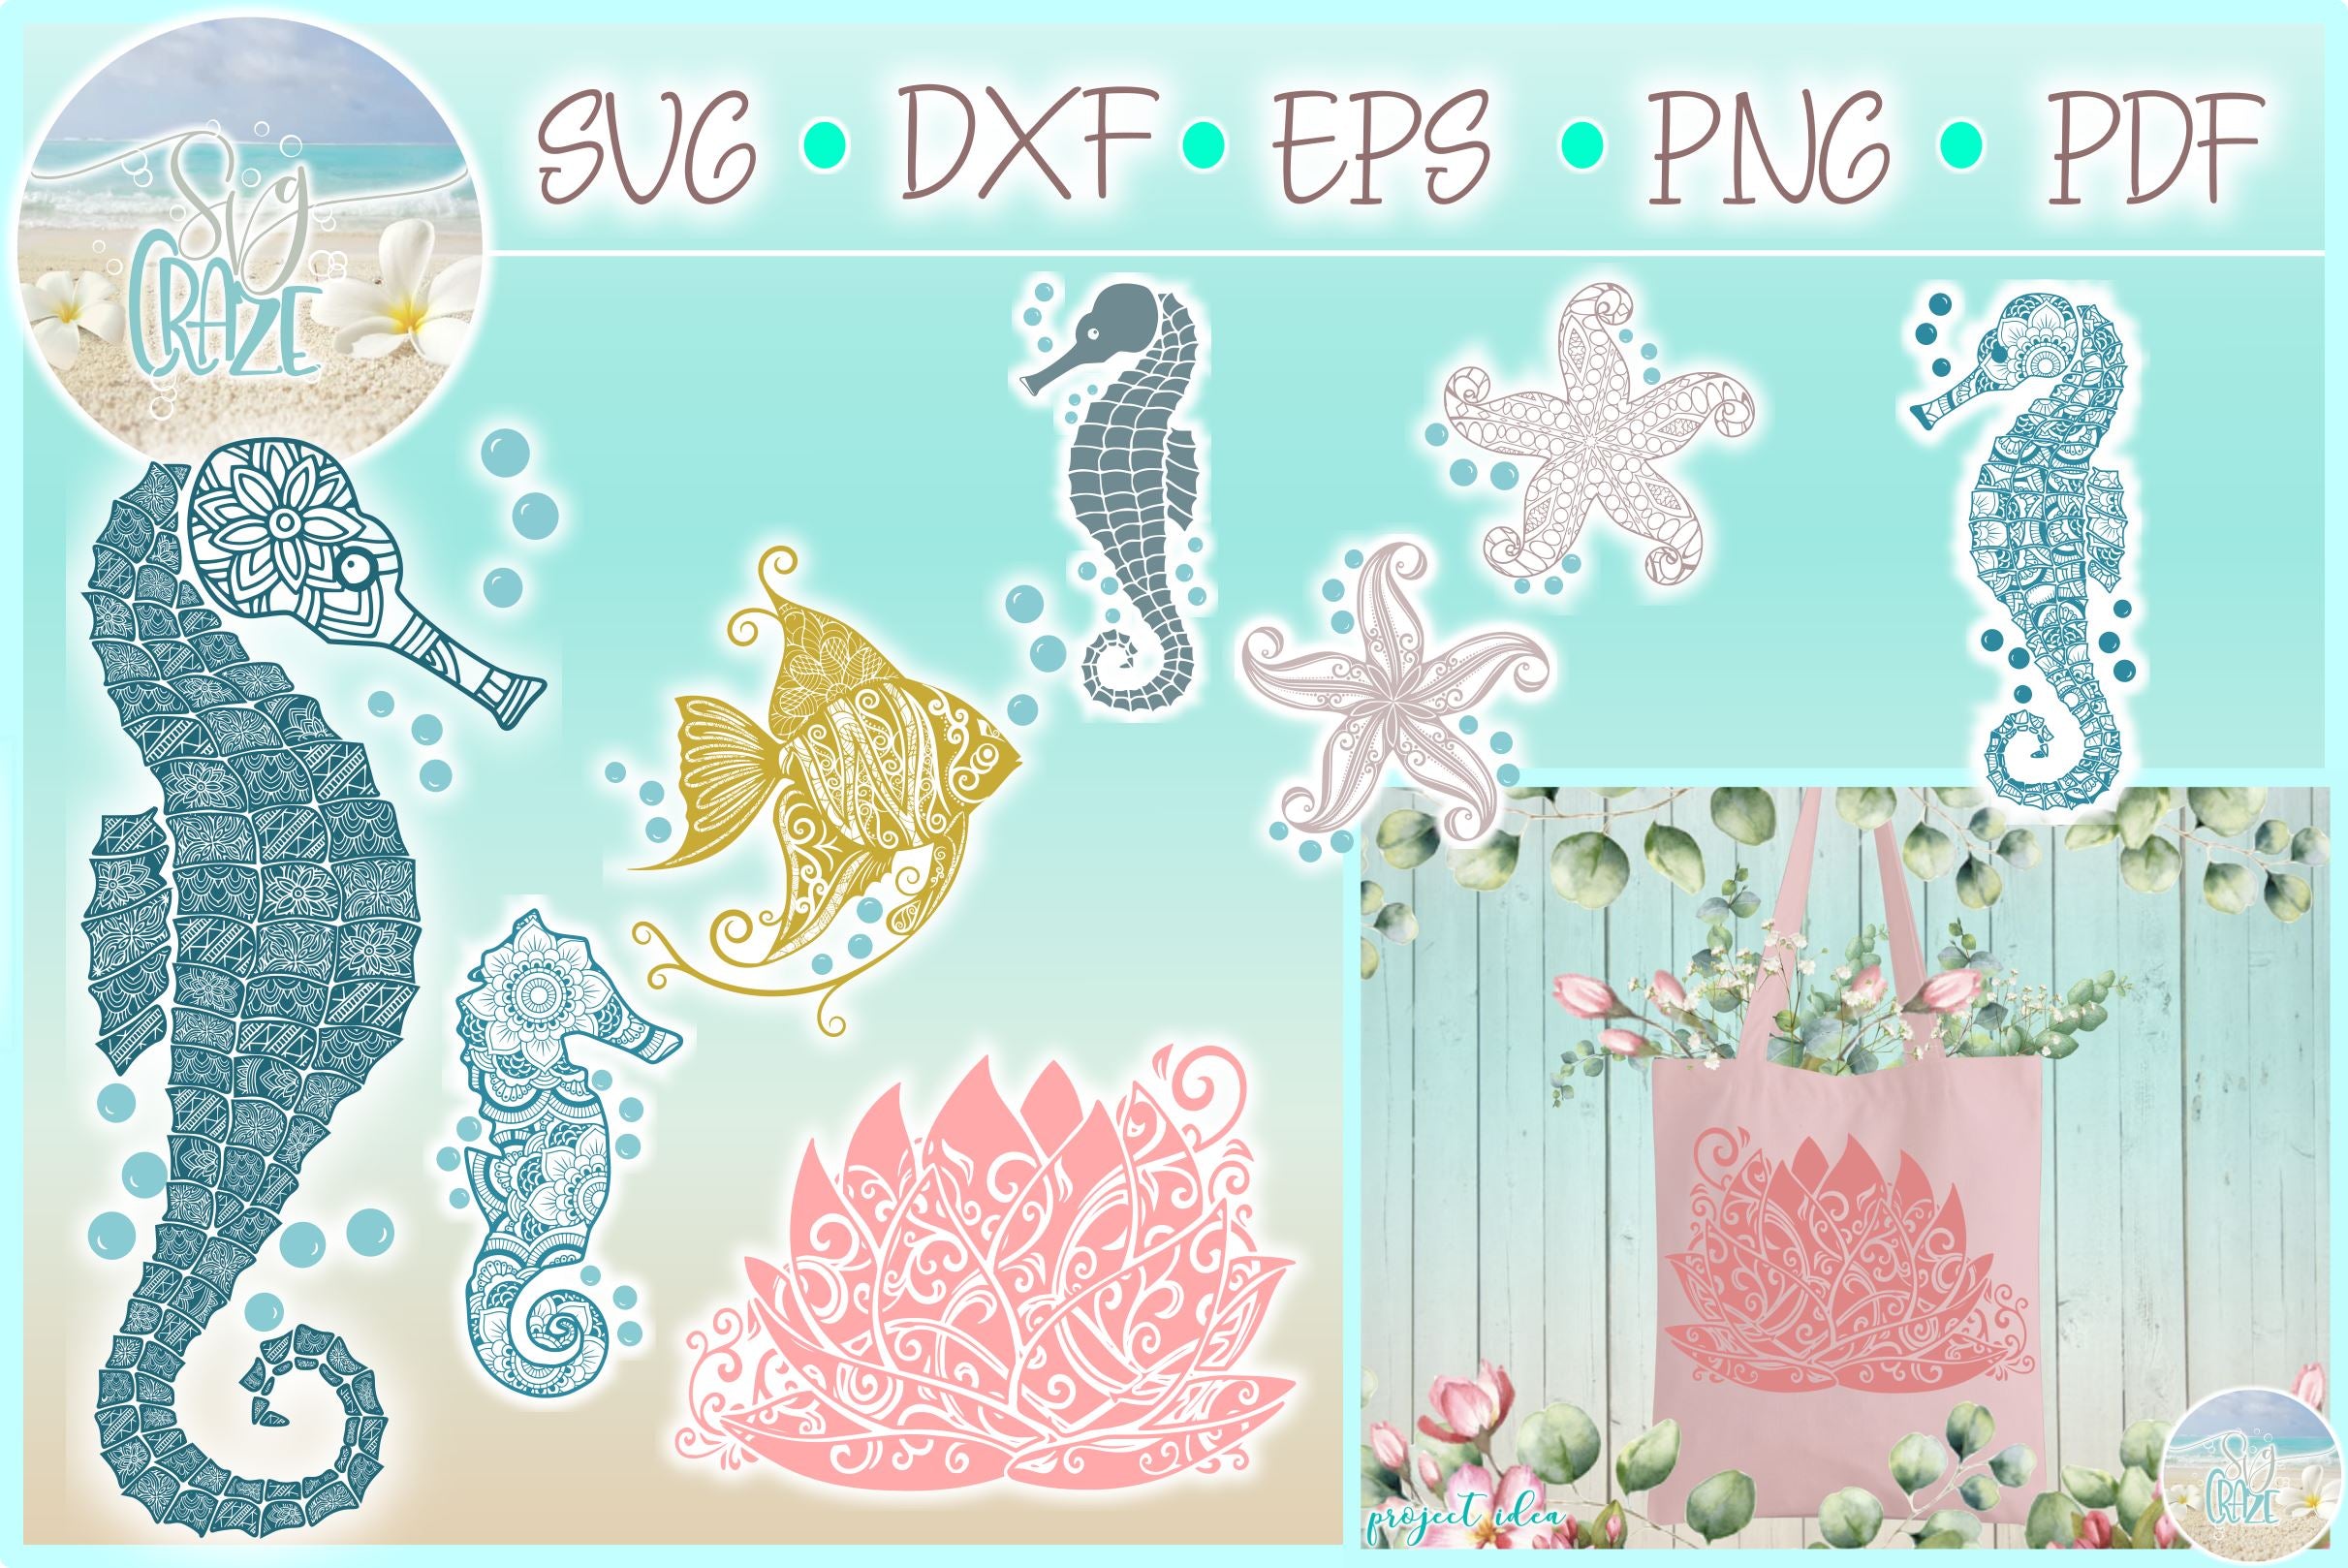 Download Dxf Eps Pdf Png Included Angel Fish Mandala Zentangle Svg Files For Cricut Silhouette Digital Art Collectibles Womenintech Fi